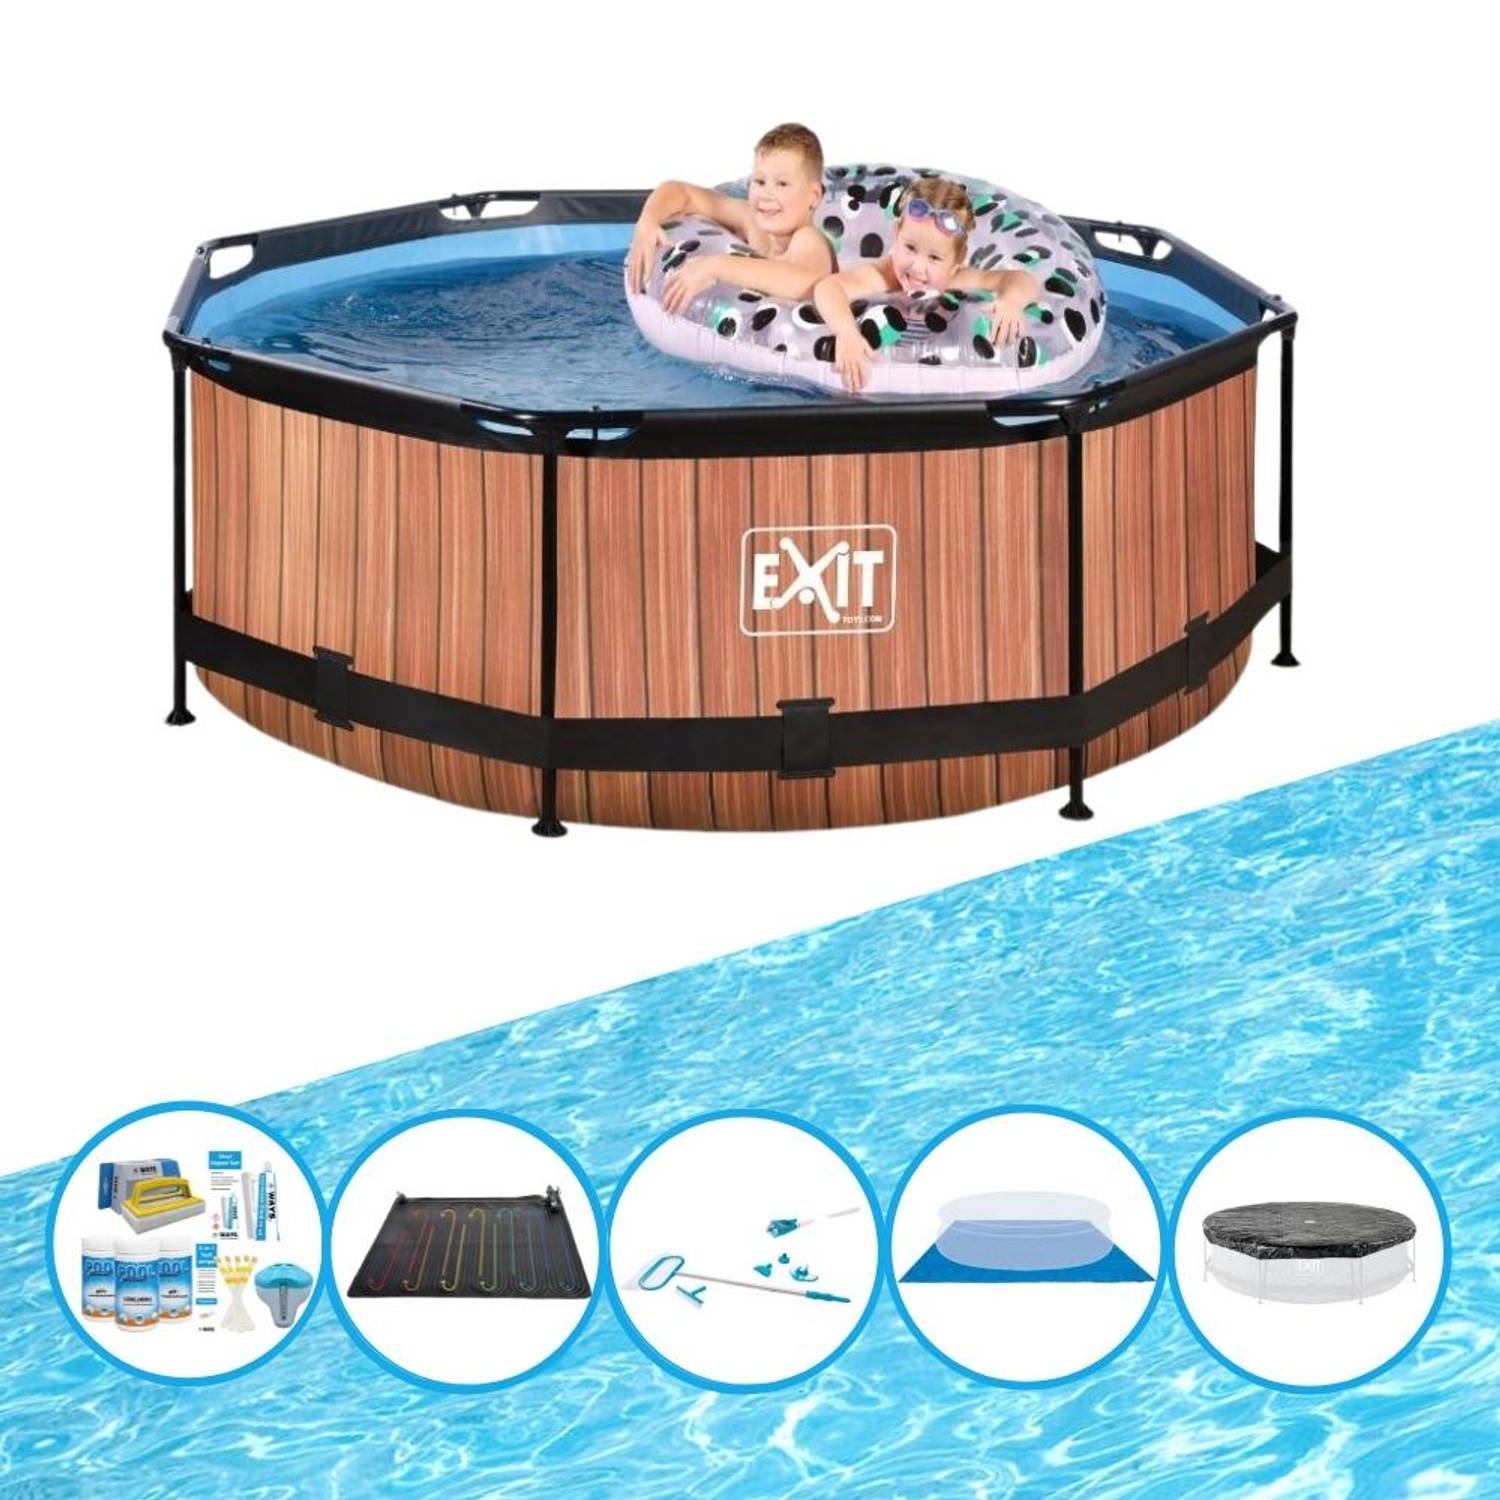 EXIT Zwembad Timber Style - Frame Pool ø244x76cm - Inclusief bijbehorende accessoires